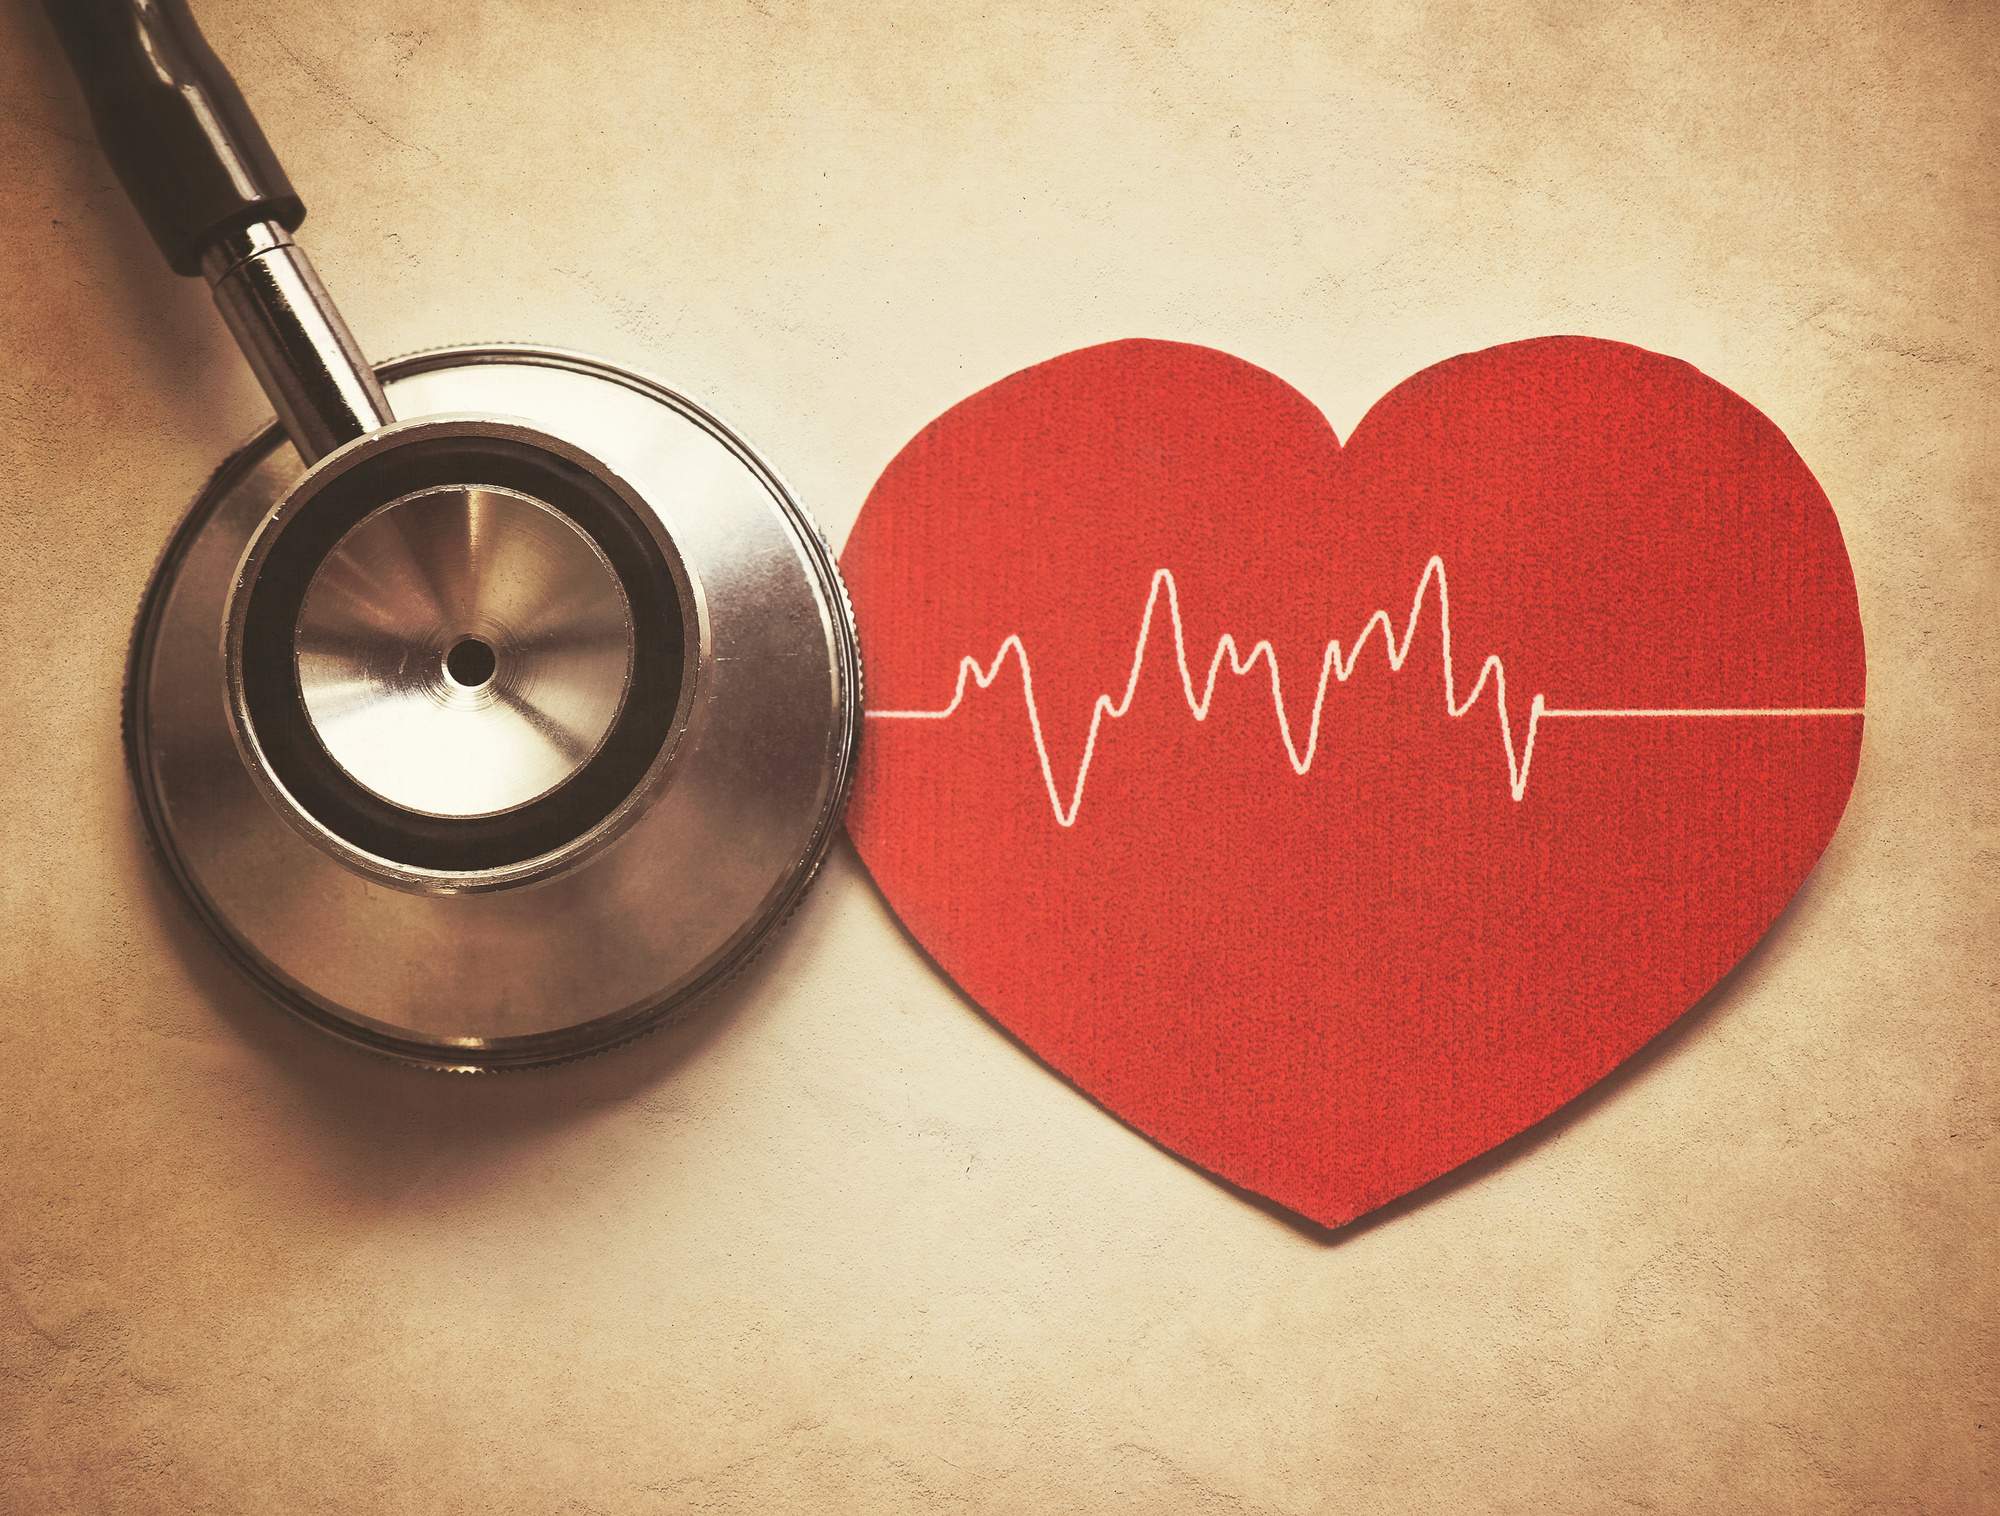 Cardiovascular vs Circulatory System: What Are the Differences?